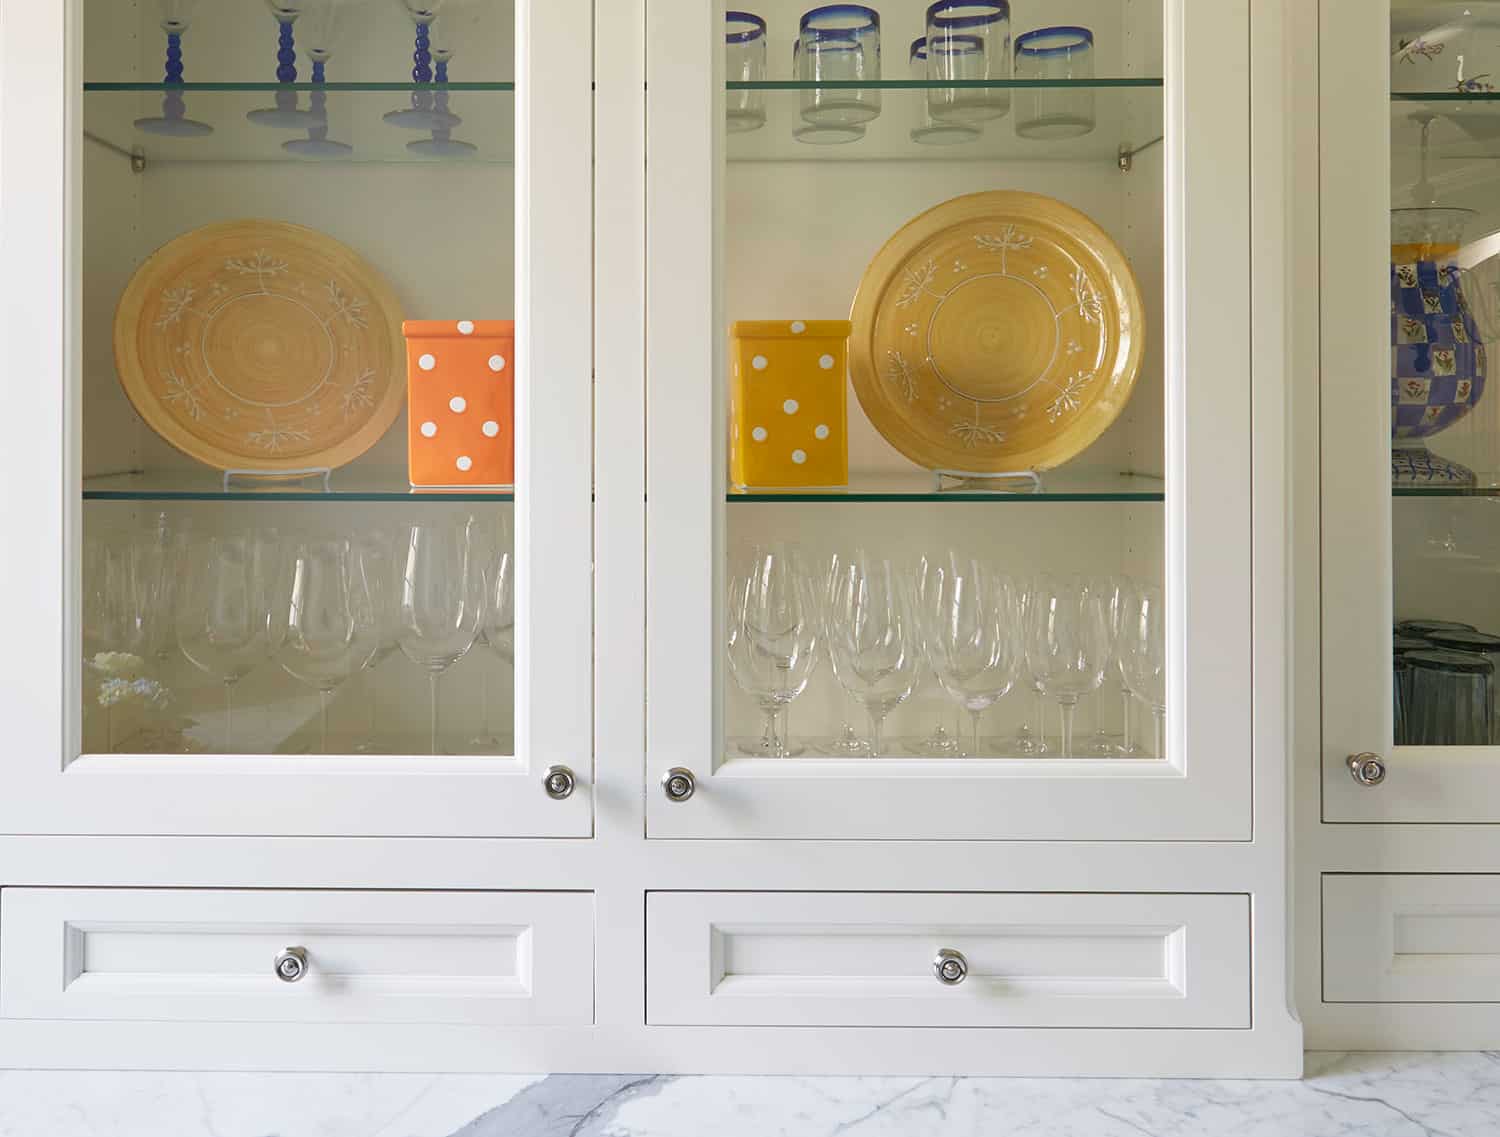 inset-doors-and-drawers-painted-white-cabinets-butlers-pantry